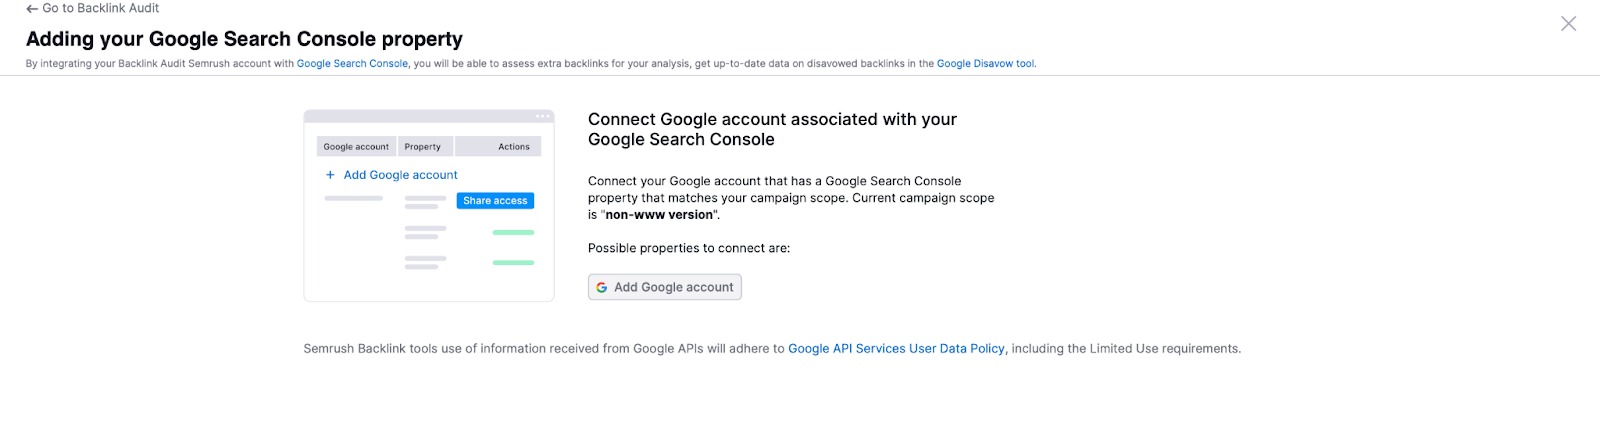 A pop-up asking to connect the Google account associated with your Google Search Console. 